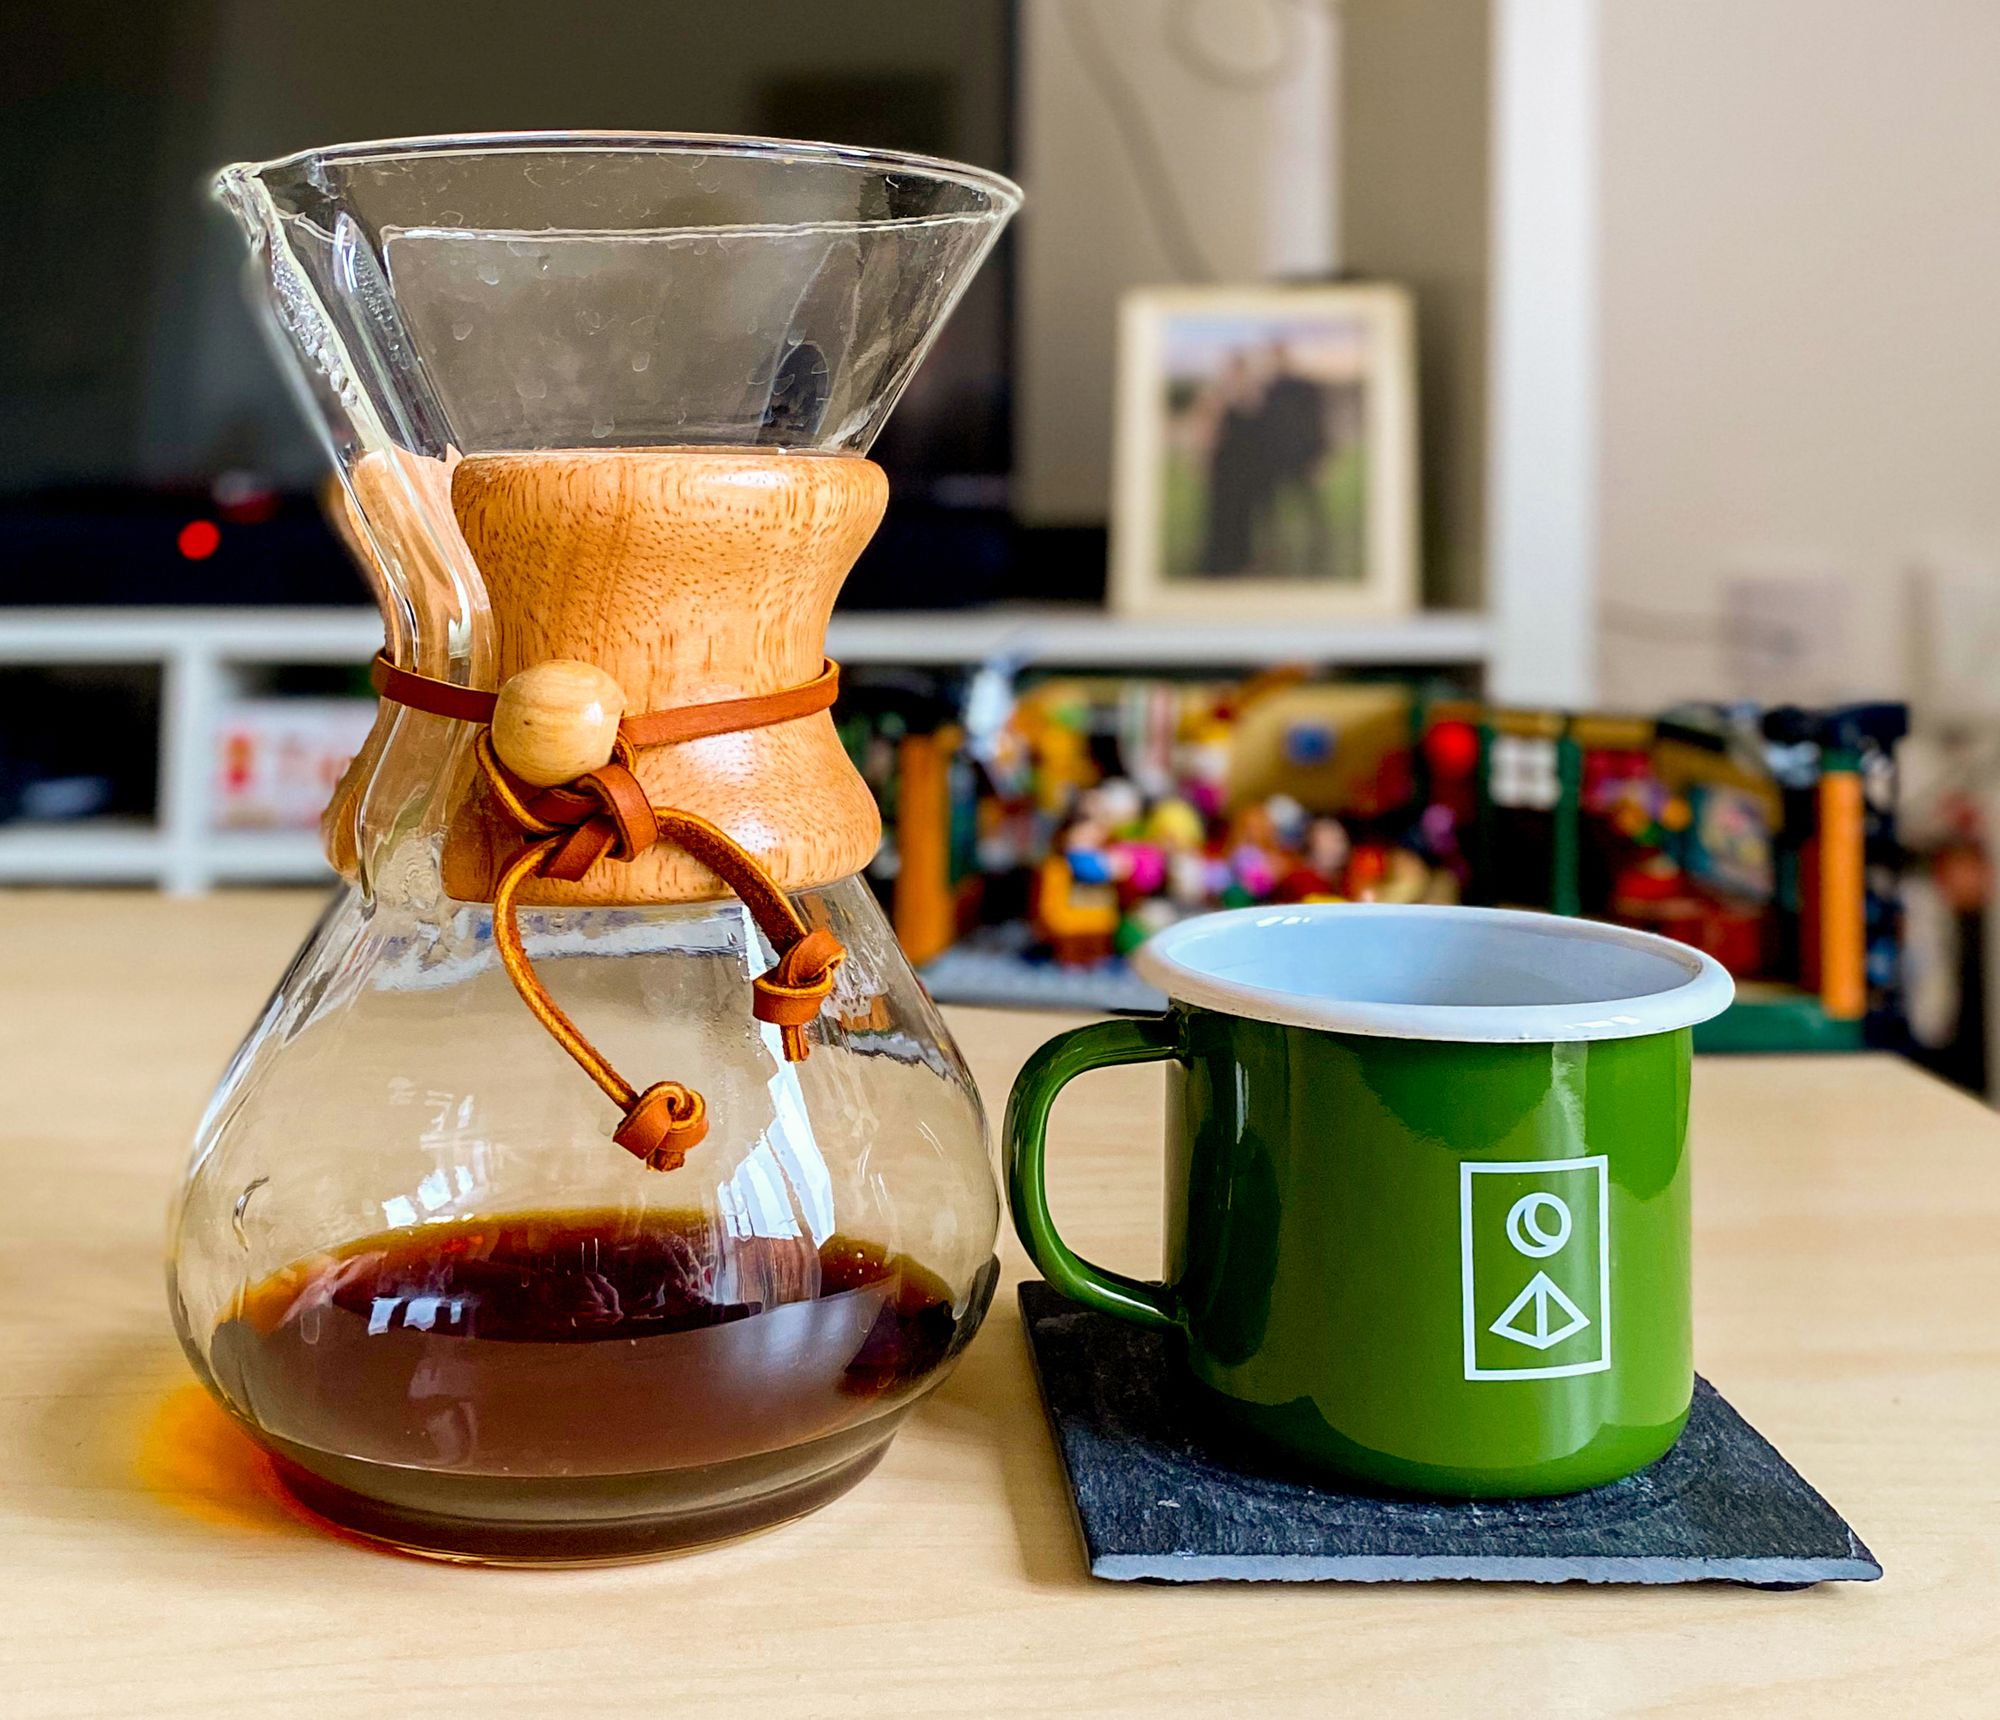 A Chemex coffee dripper with a small amount of coffee left in the bottom and a green enamel mug on a slate coaster, both placed on a wooden coffee table